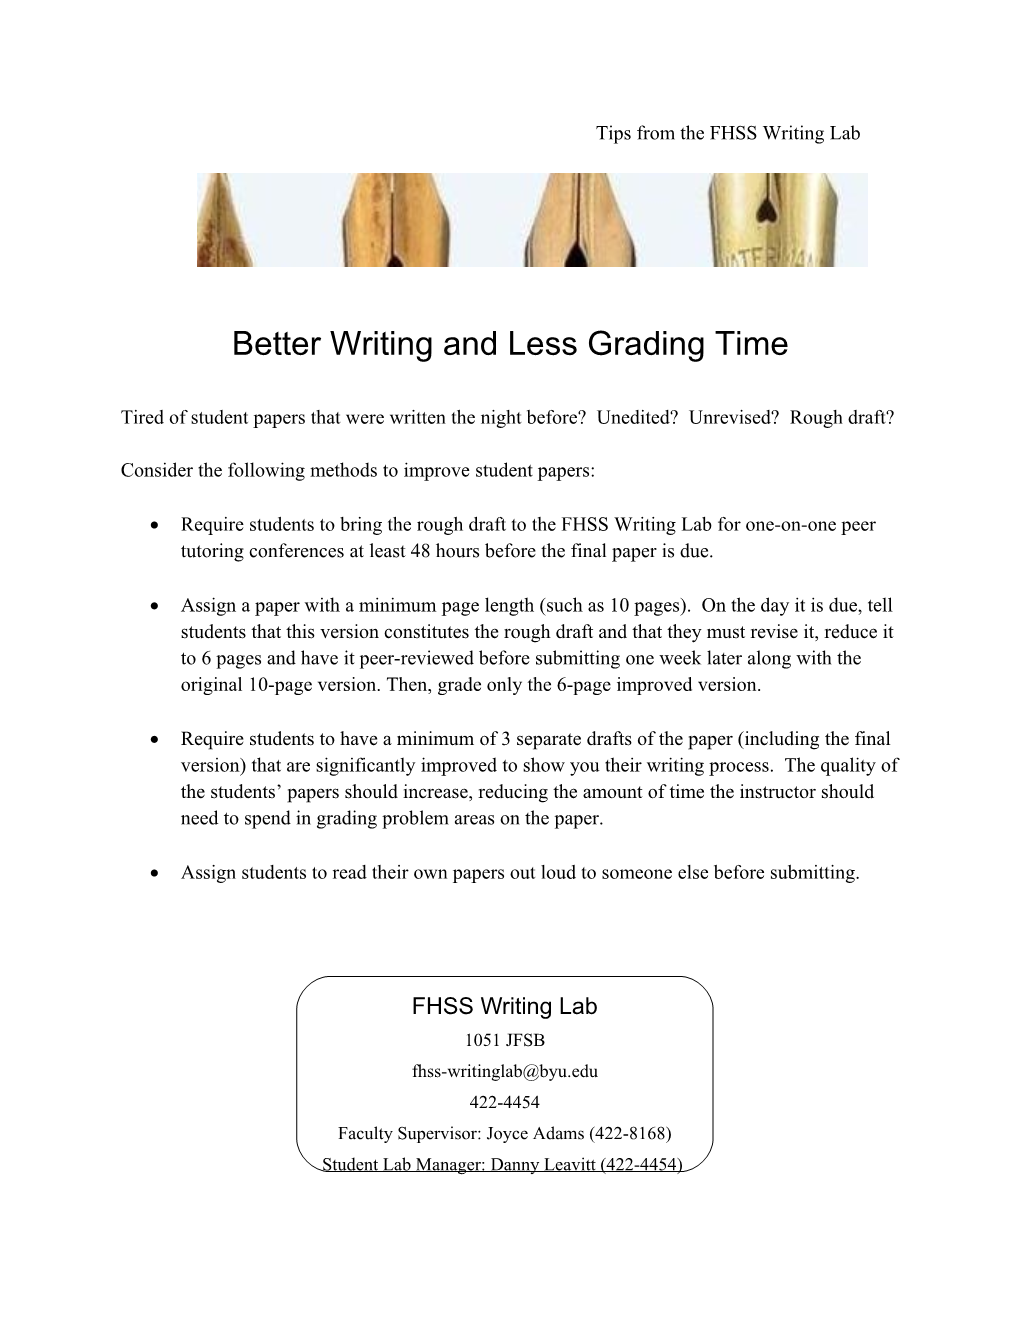 Tips from the FHSS Writing Lab